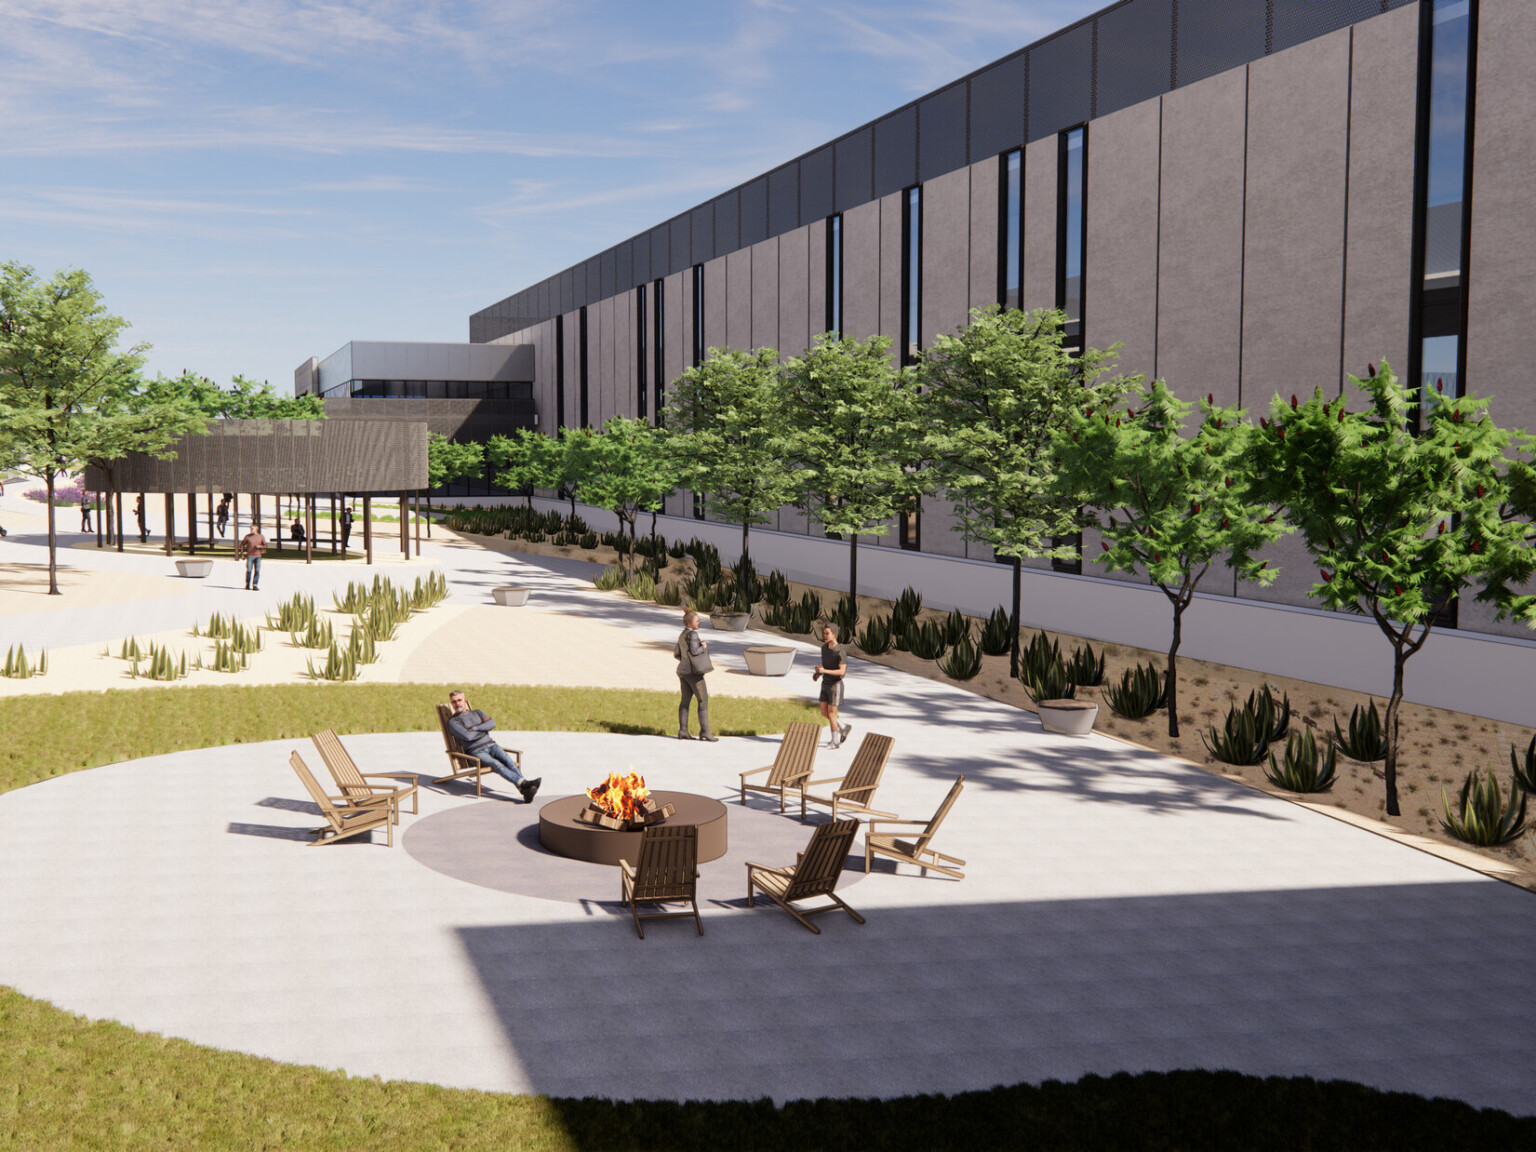 Outdoor amenities such as a fire pit with seating and walking trail around the exterior of data center building clad in prefabricated, concrete palette with linear window cutouts